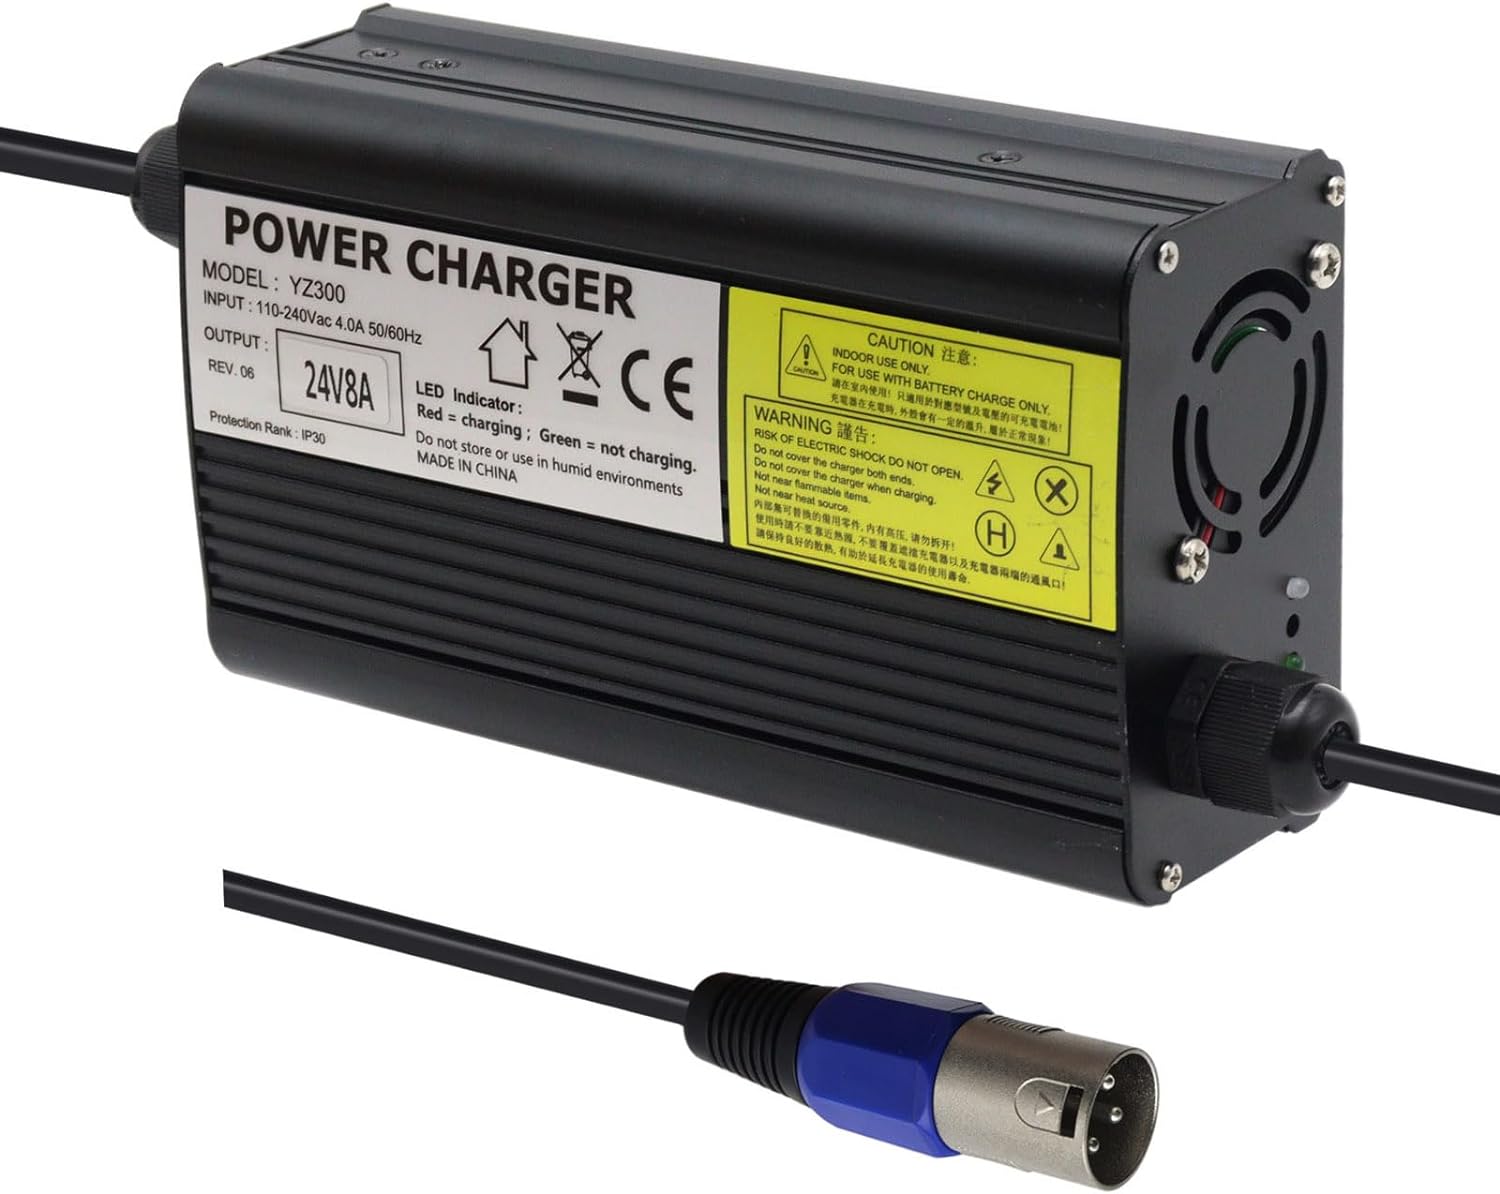 24V 8A Battery Charger with 3-Pin XLR Connector for Sealed AGM, Gel, 24BC8000T-1, Jazzy 1450, Invacare Pronto M51, tdx 3